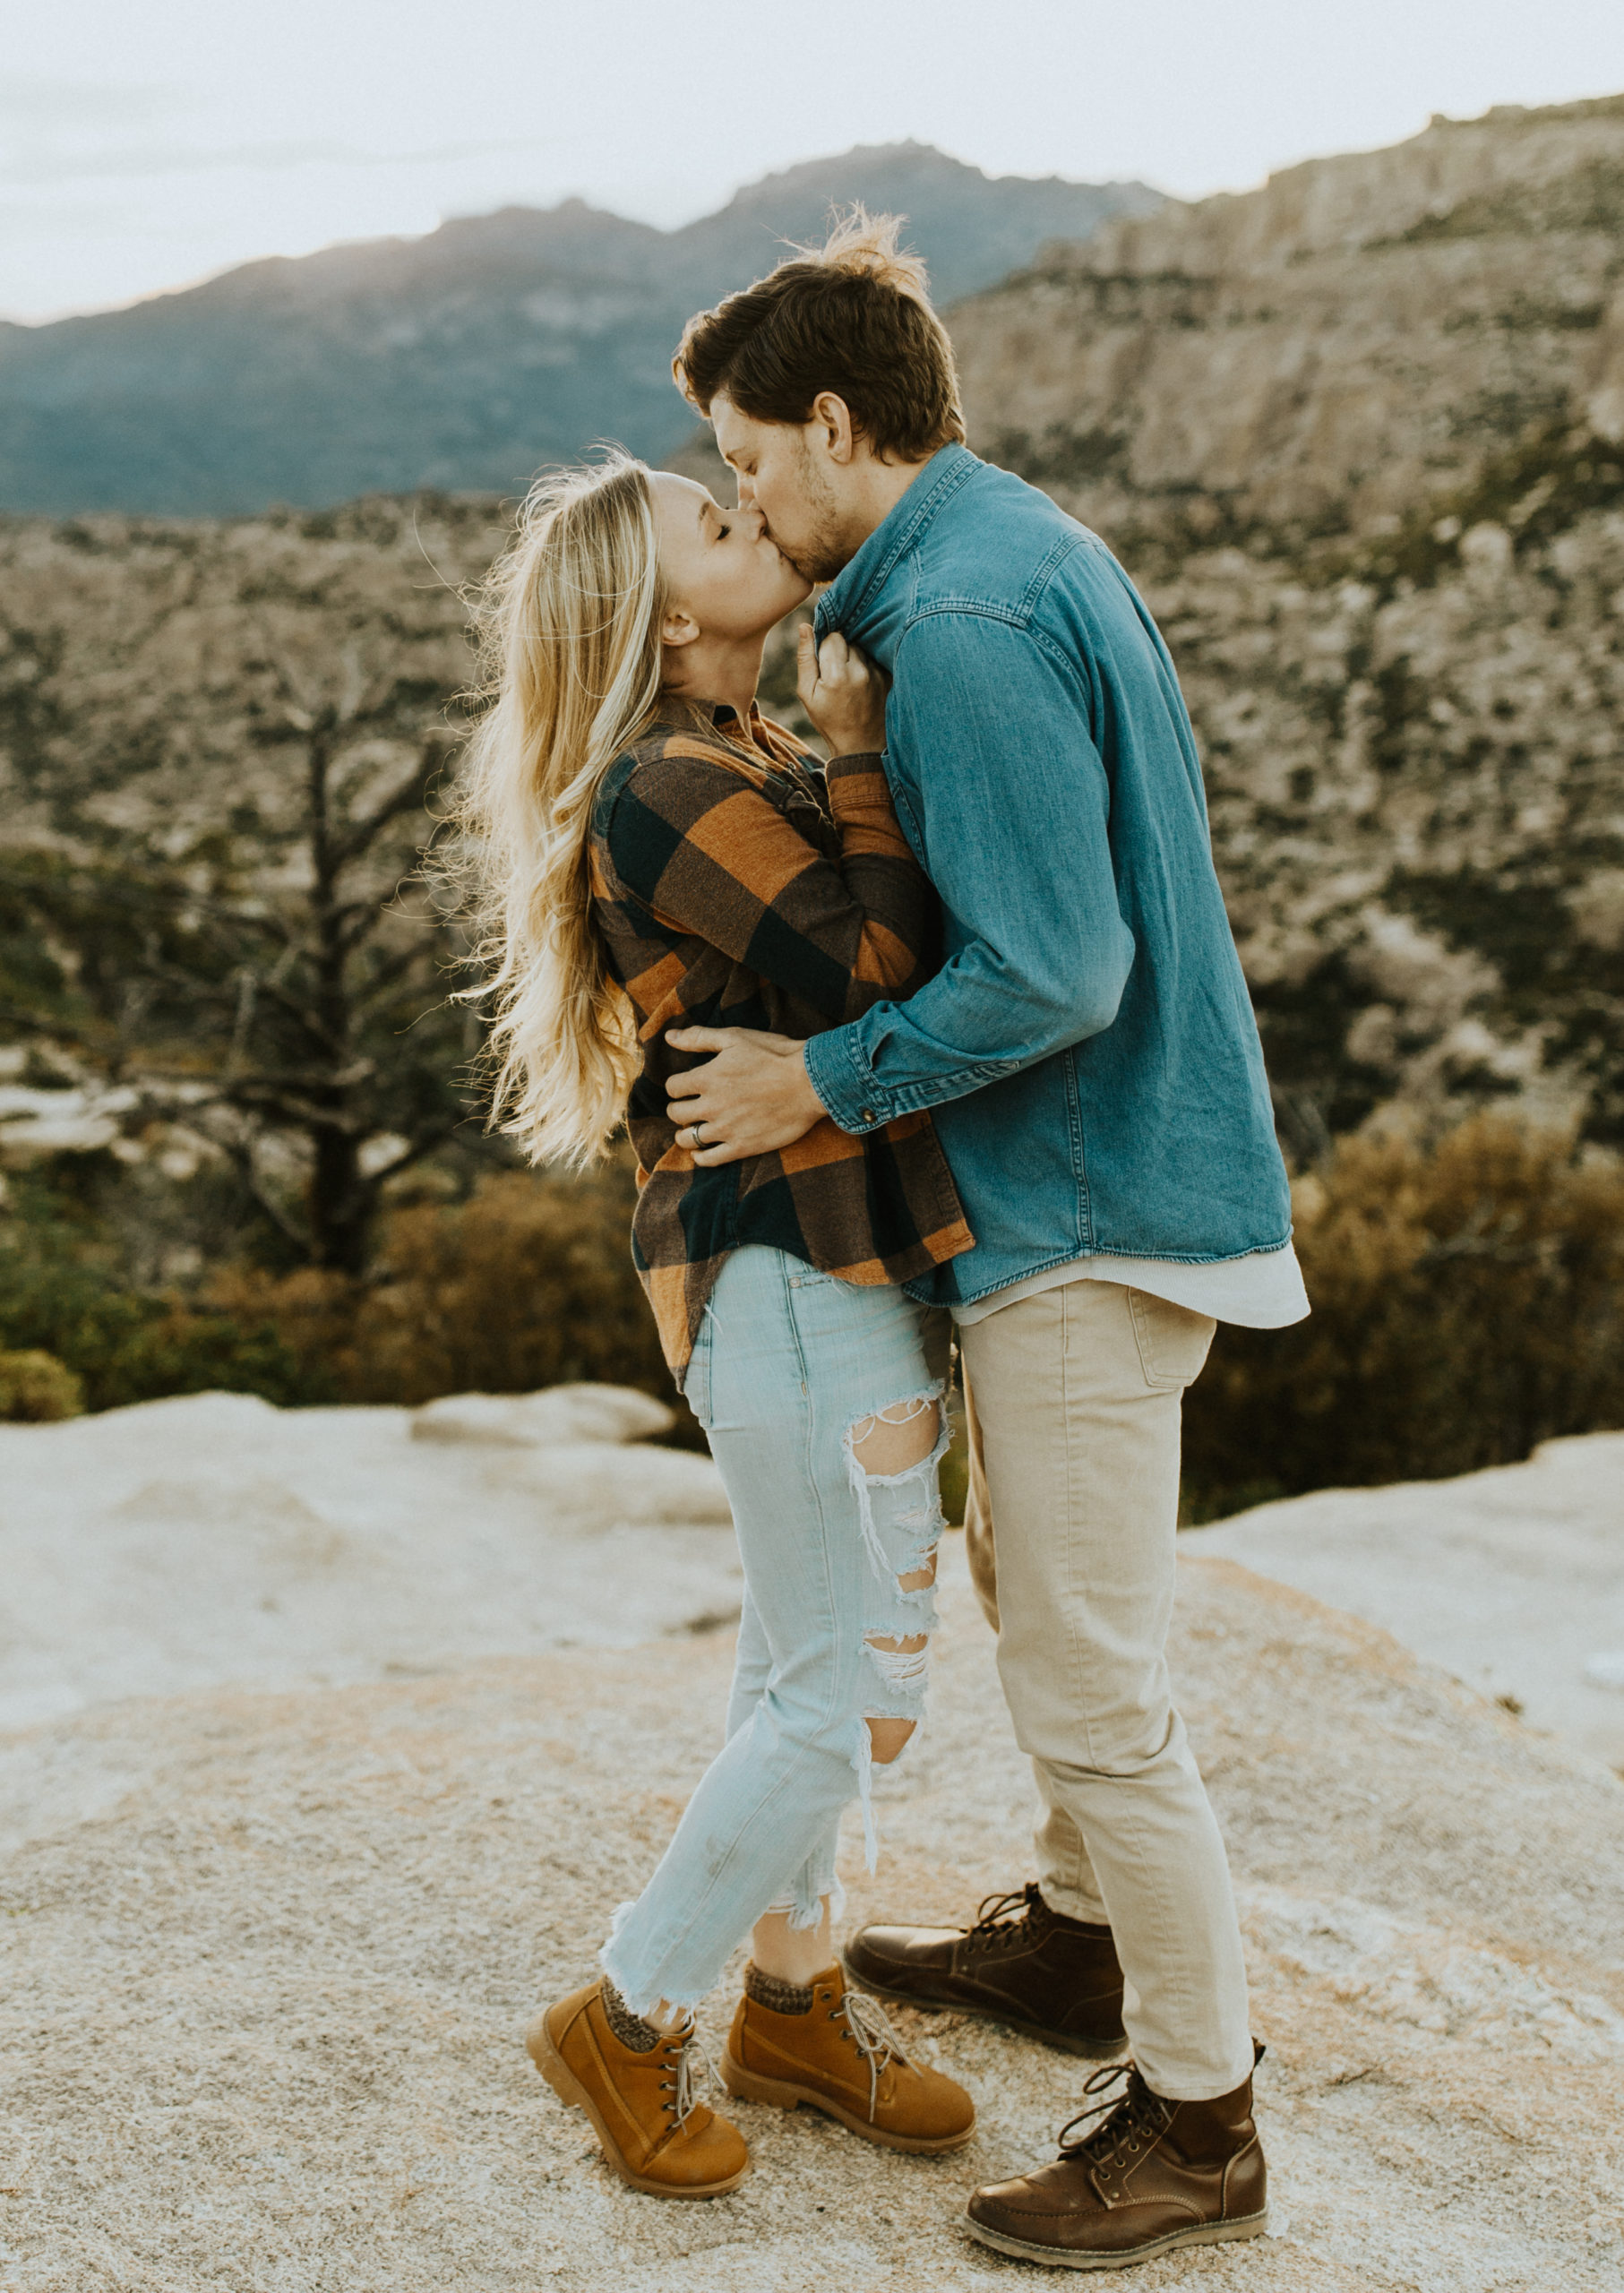 Engagement photo in Tucson Arizona with a female in plaid shirt and male in denim shirt